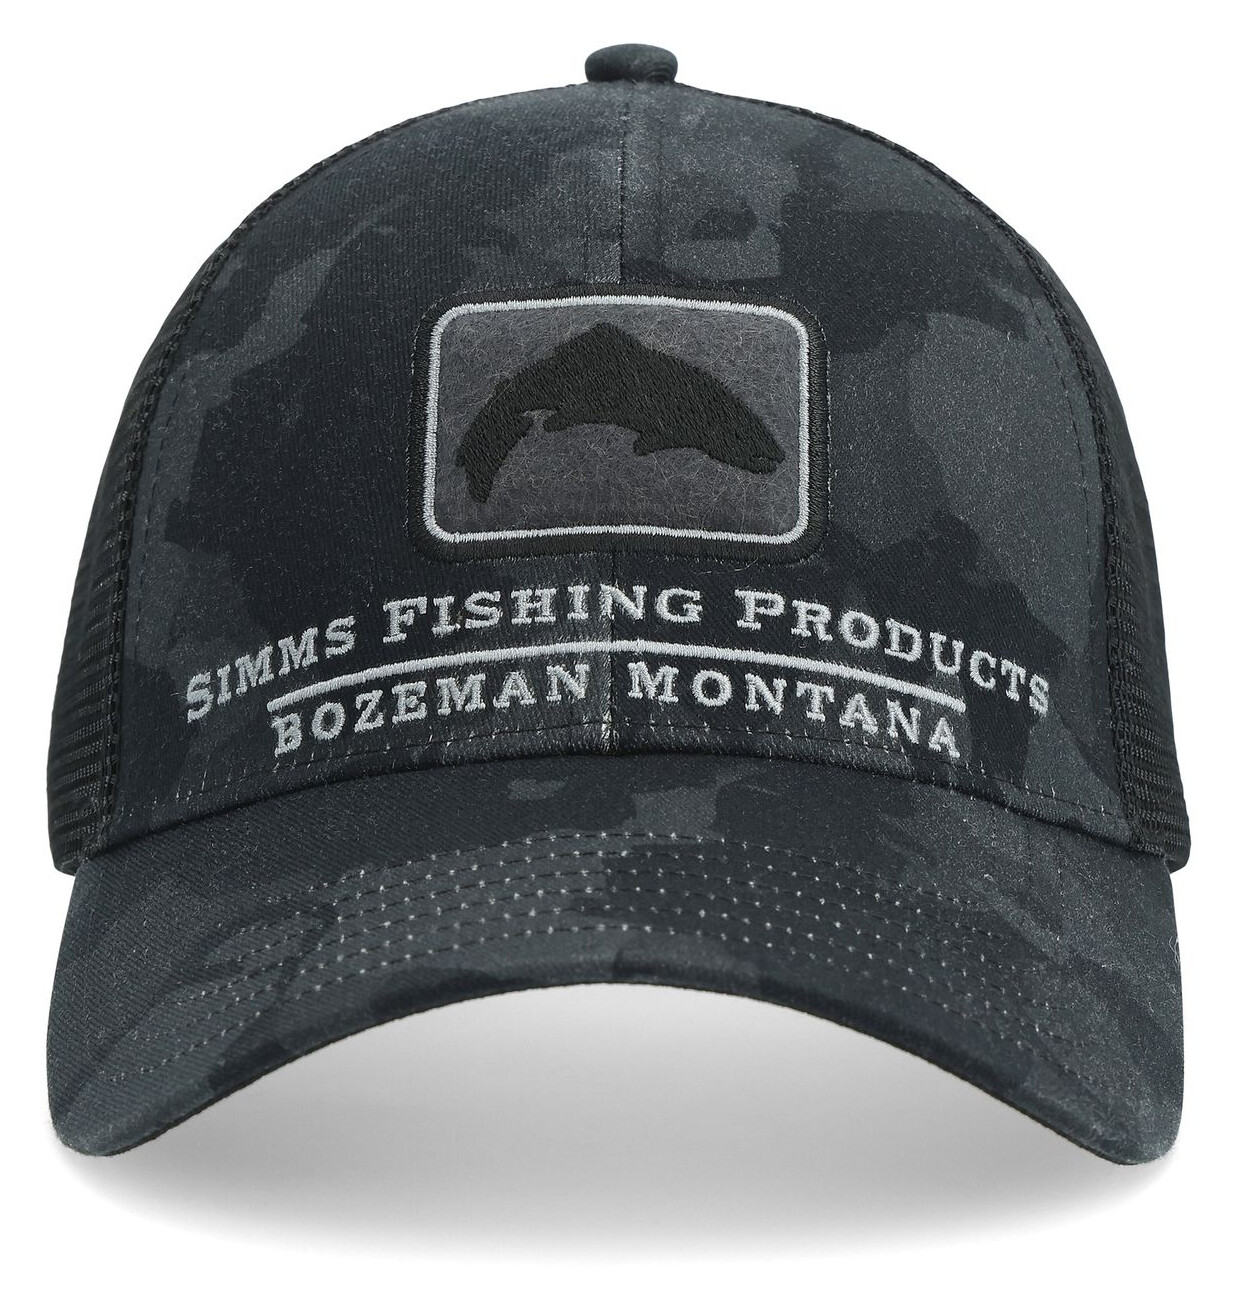 https://www.czechnymph.com/data/web/auto-imported-products/simms/simms-trout-icon-trucker-df7bde39.jpg